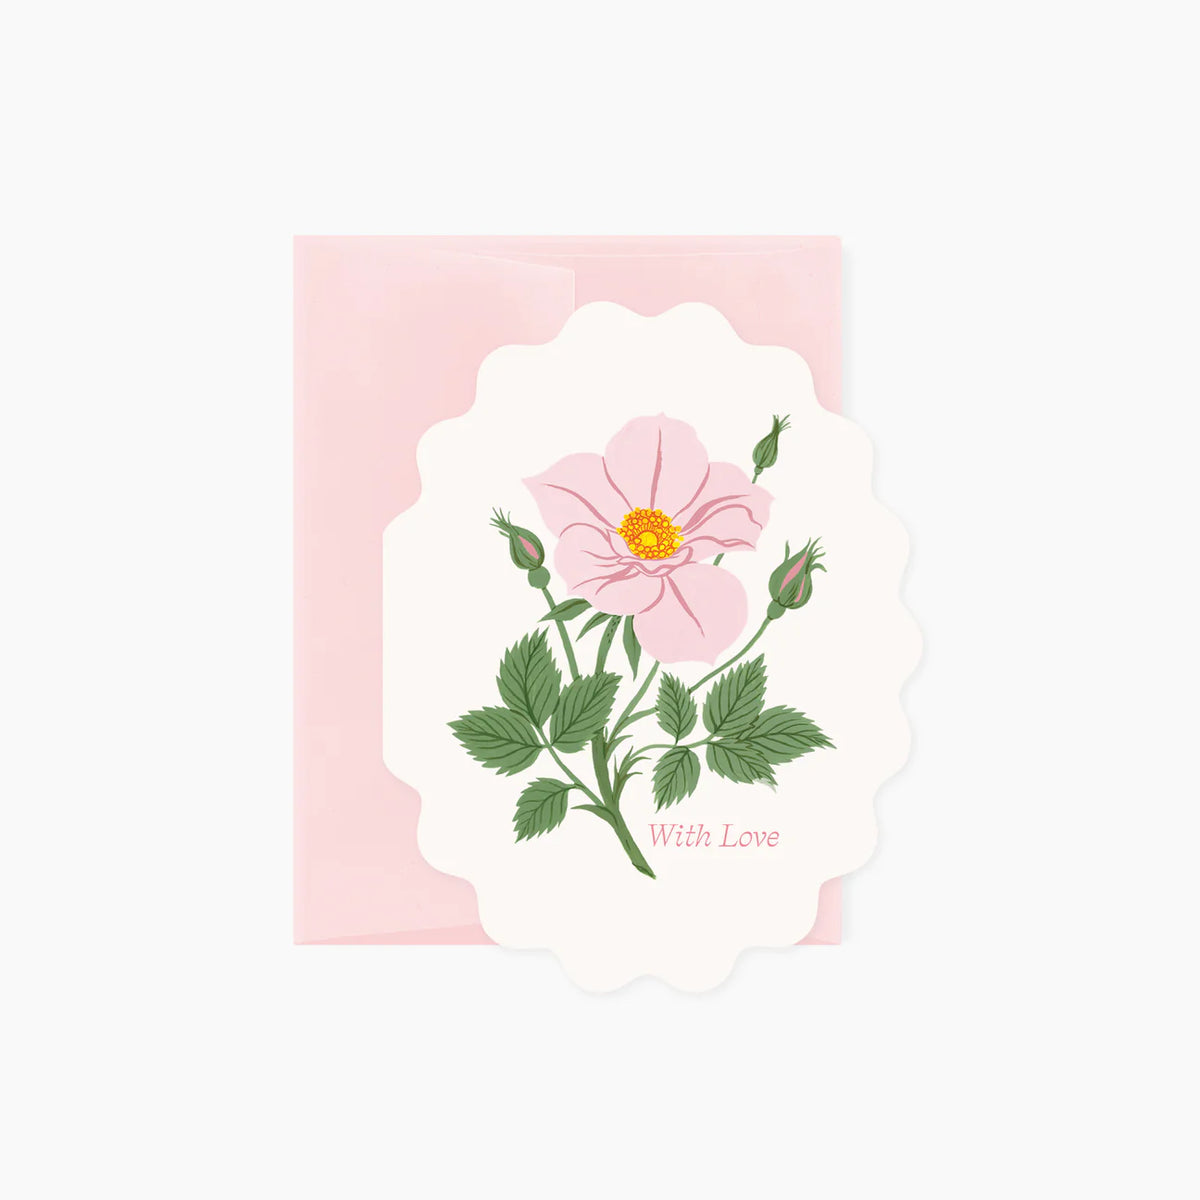 With love, wild rose card by Botanica Paper co.